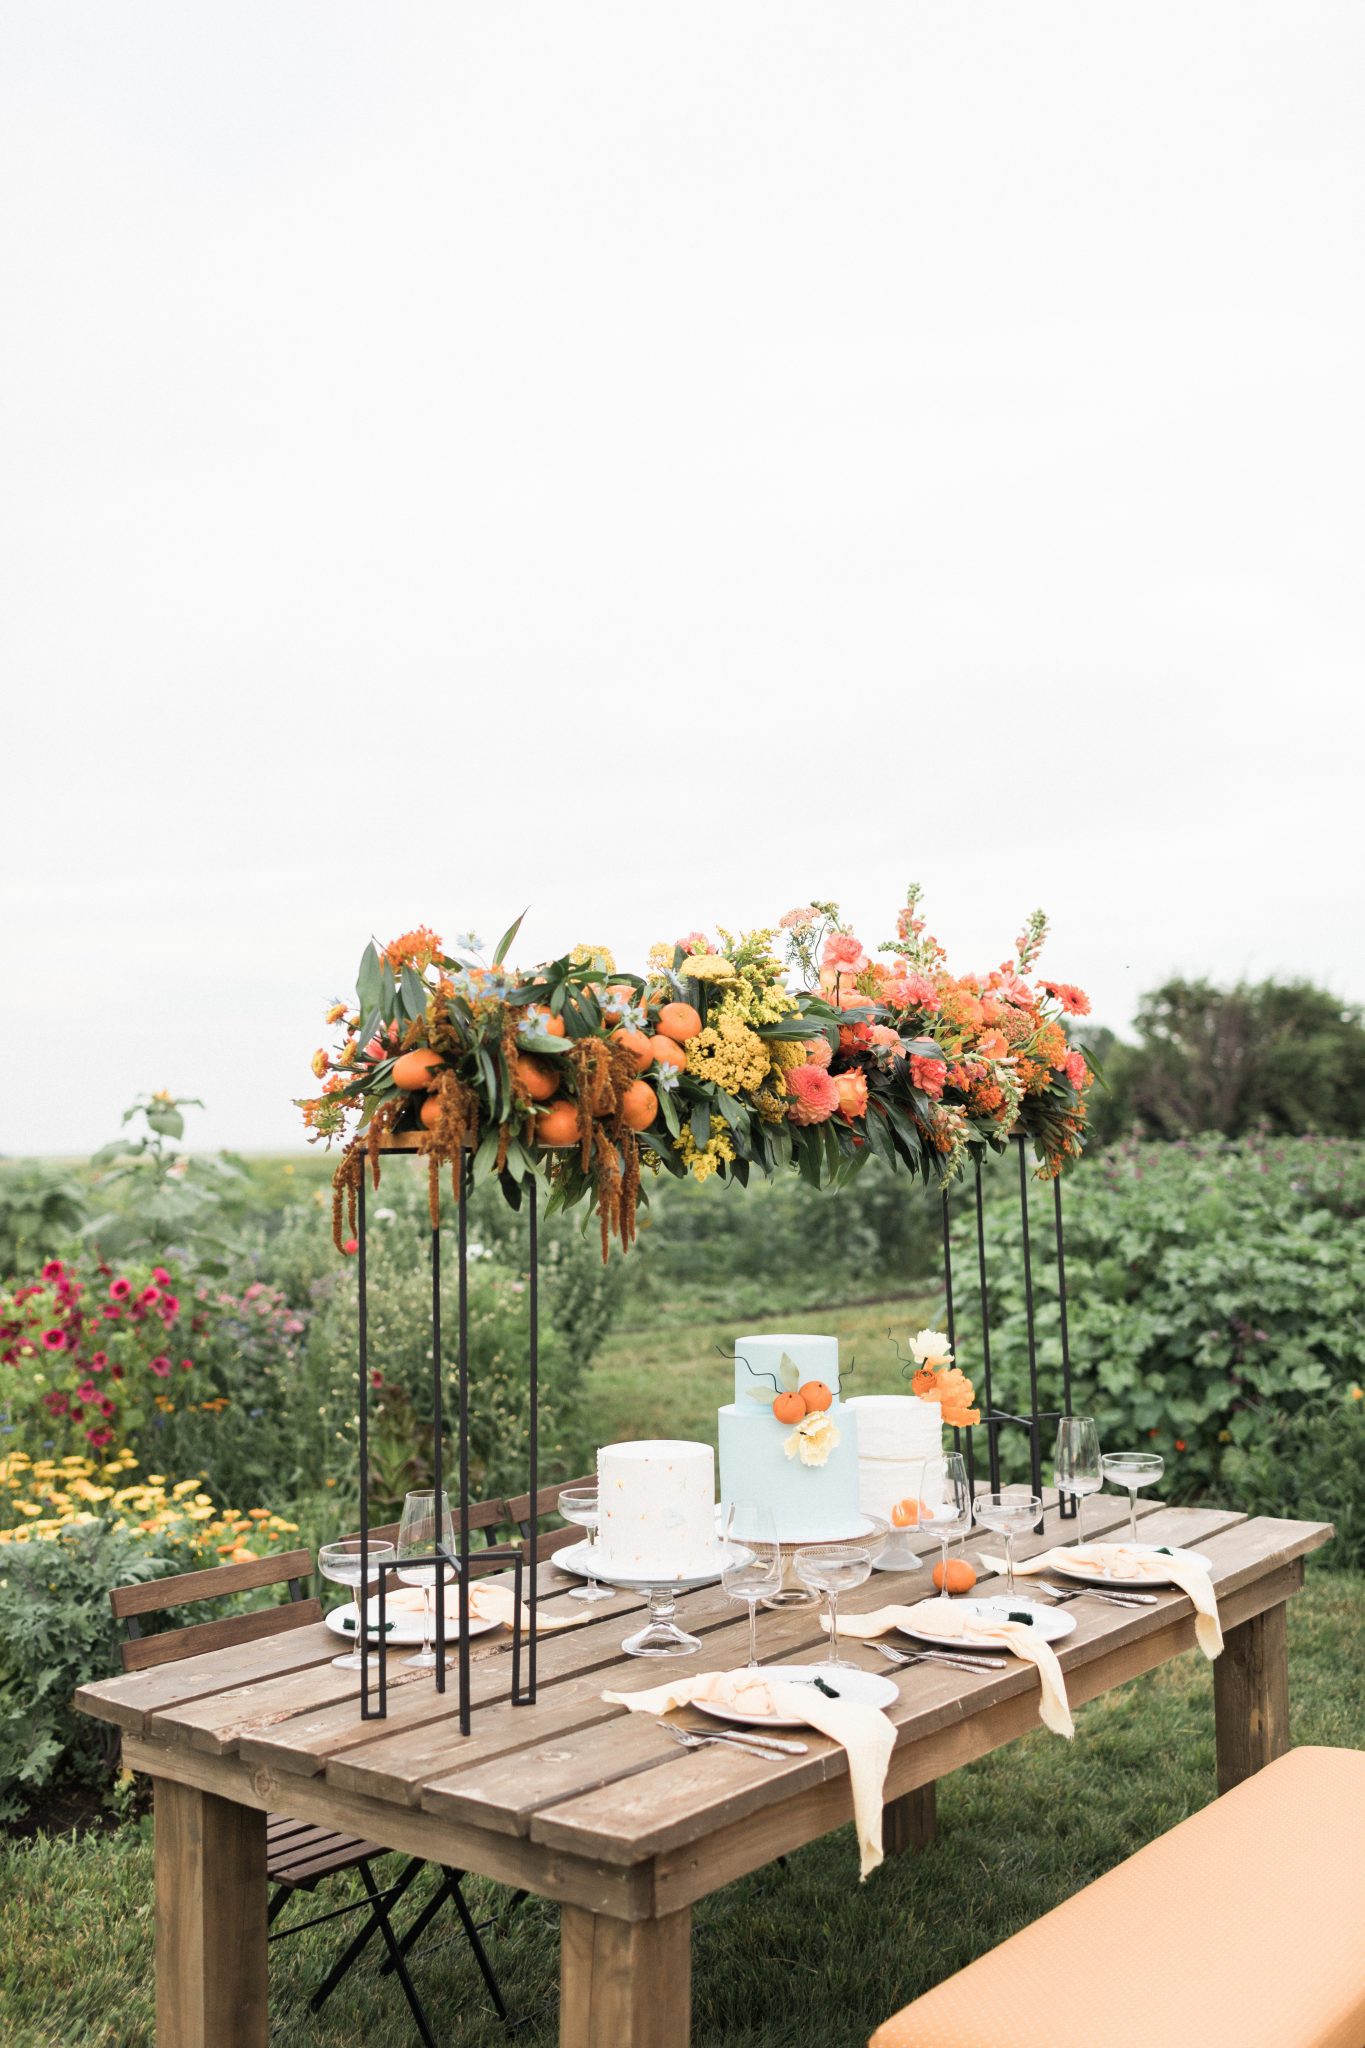 Garden inspired tablescape for a countryside wedding with tangerine accents and a robin blue wedding cake